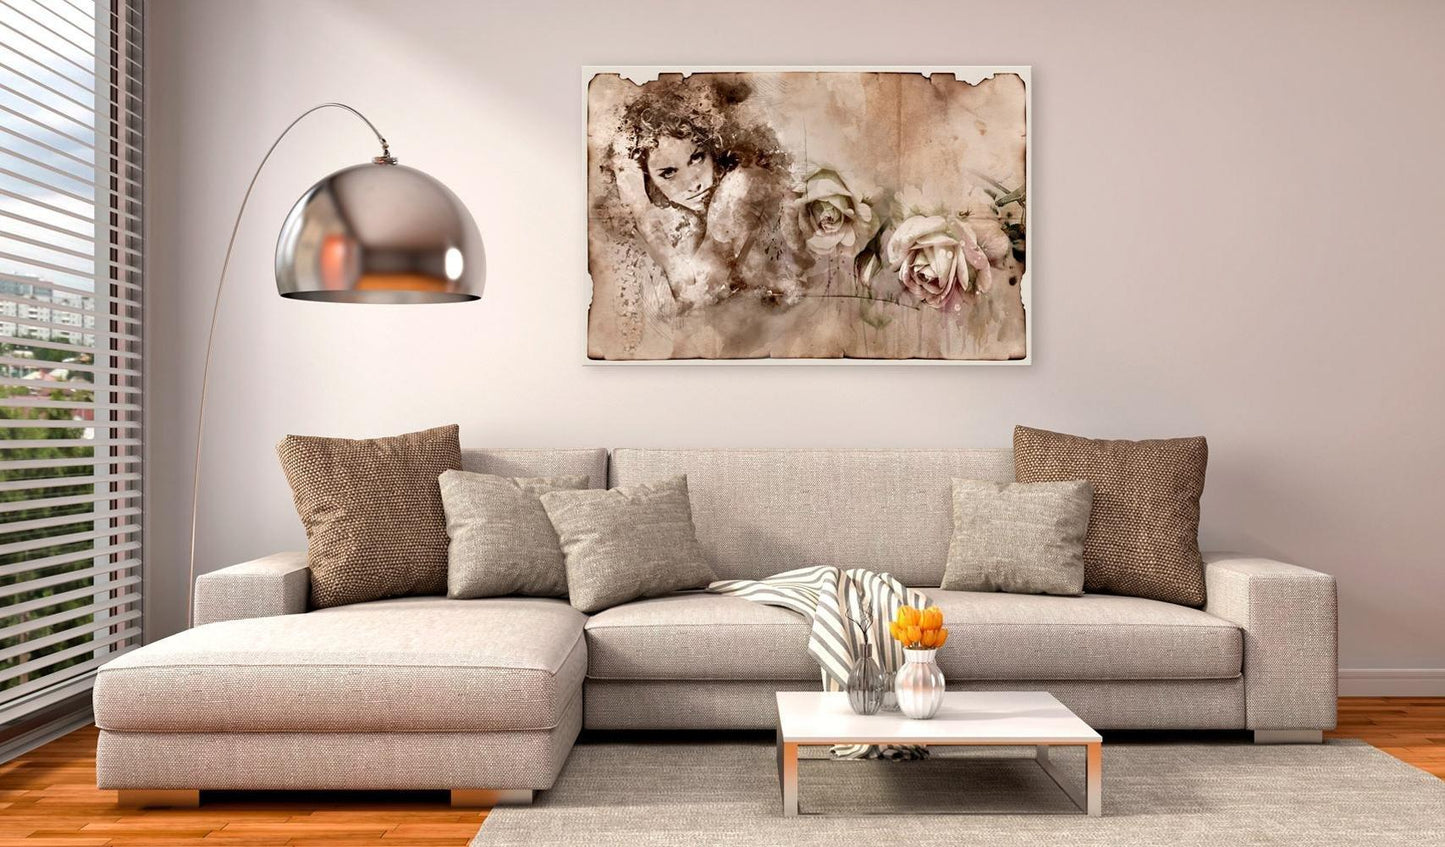 Canvas Print - Retro Style: Woman and Roses - www.trendingbestsellers.com